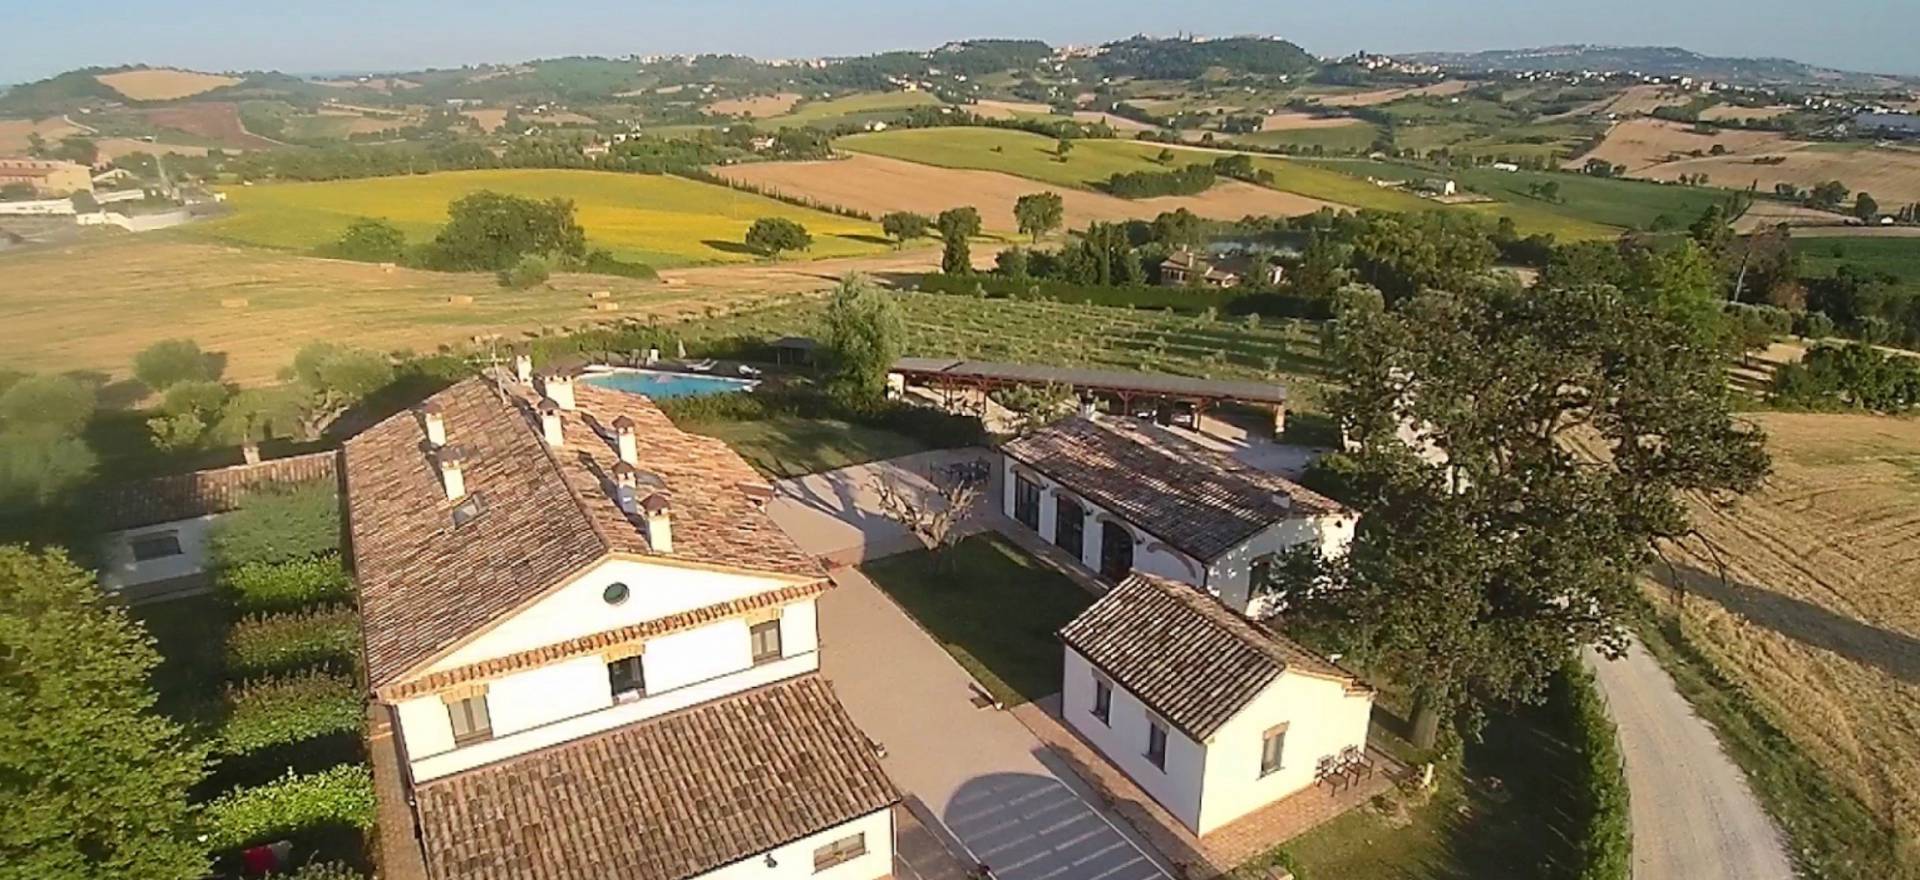 Agriturismo Marche Stylish agriturismo Marche with amazing views